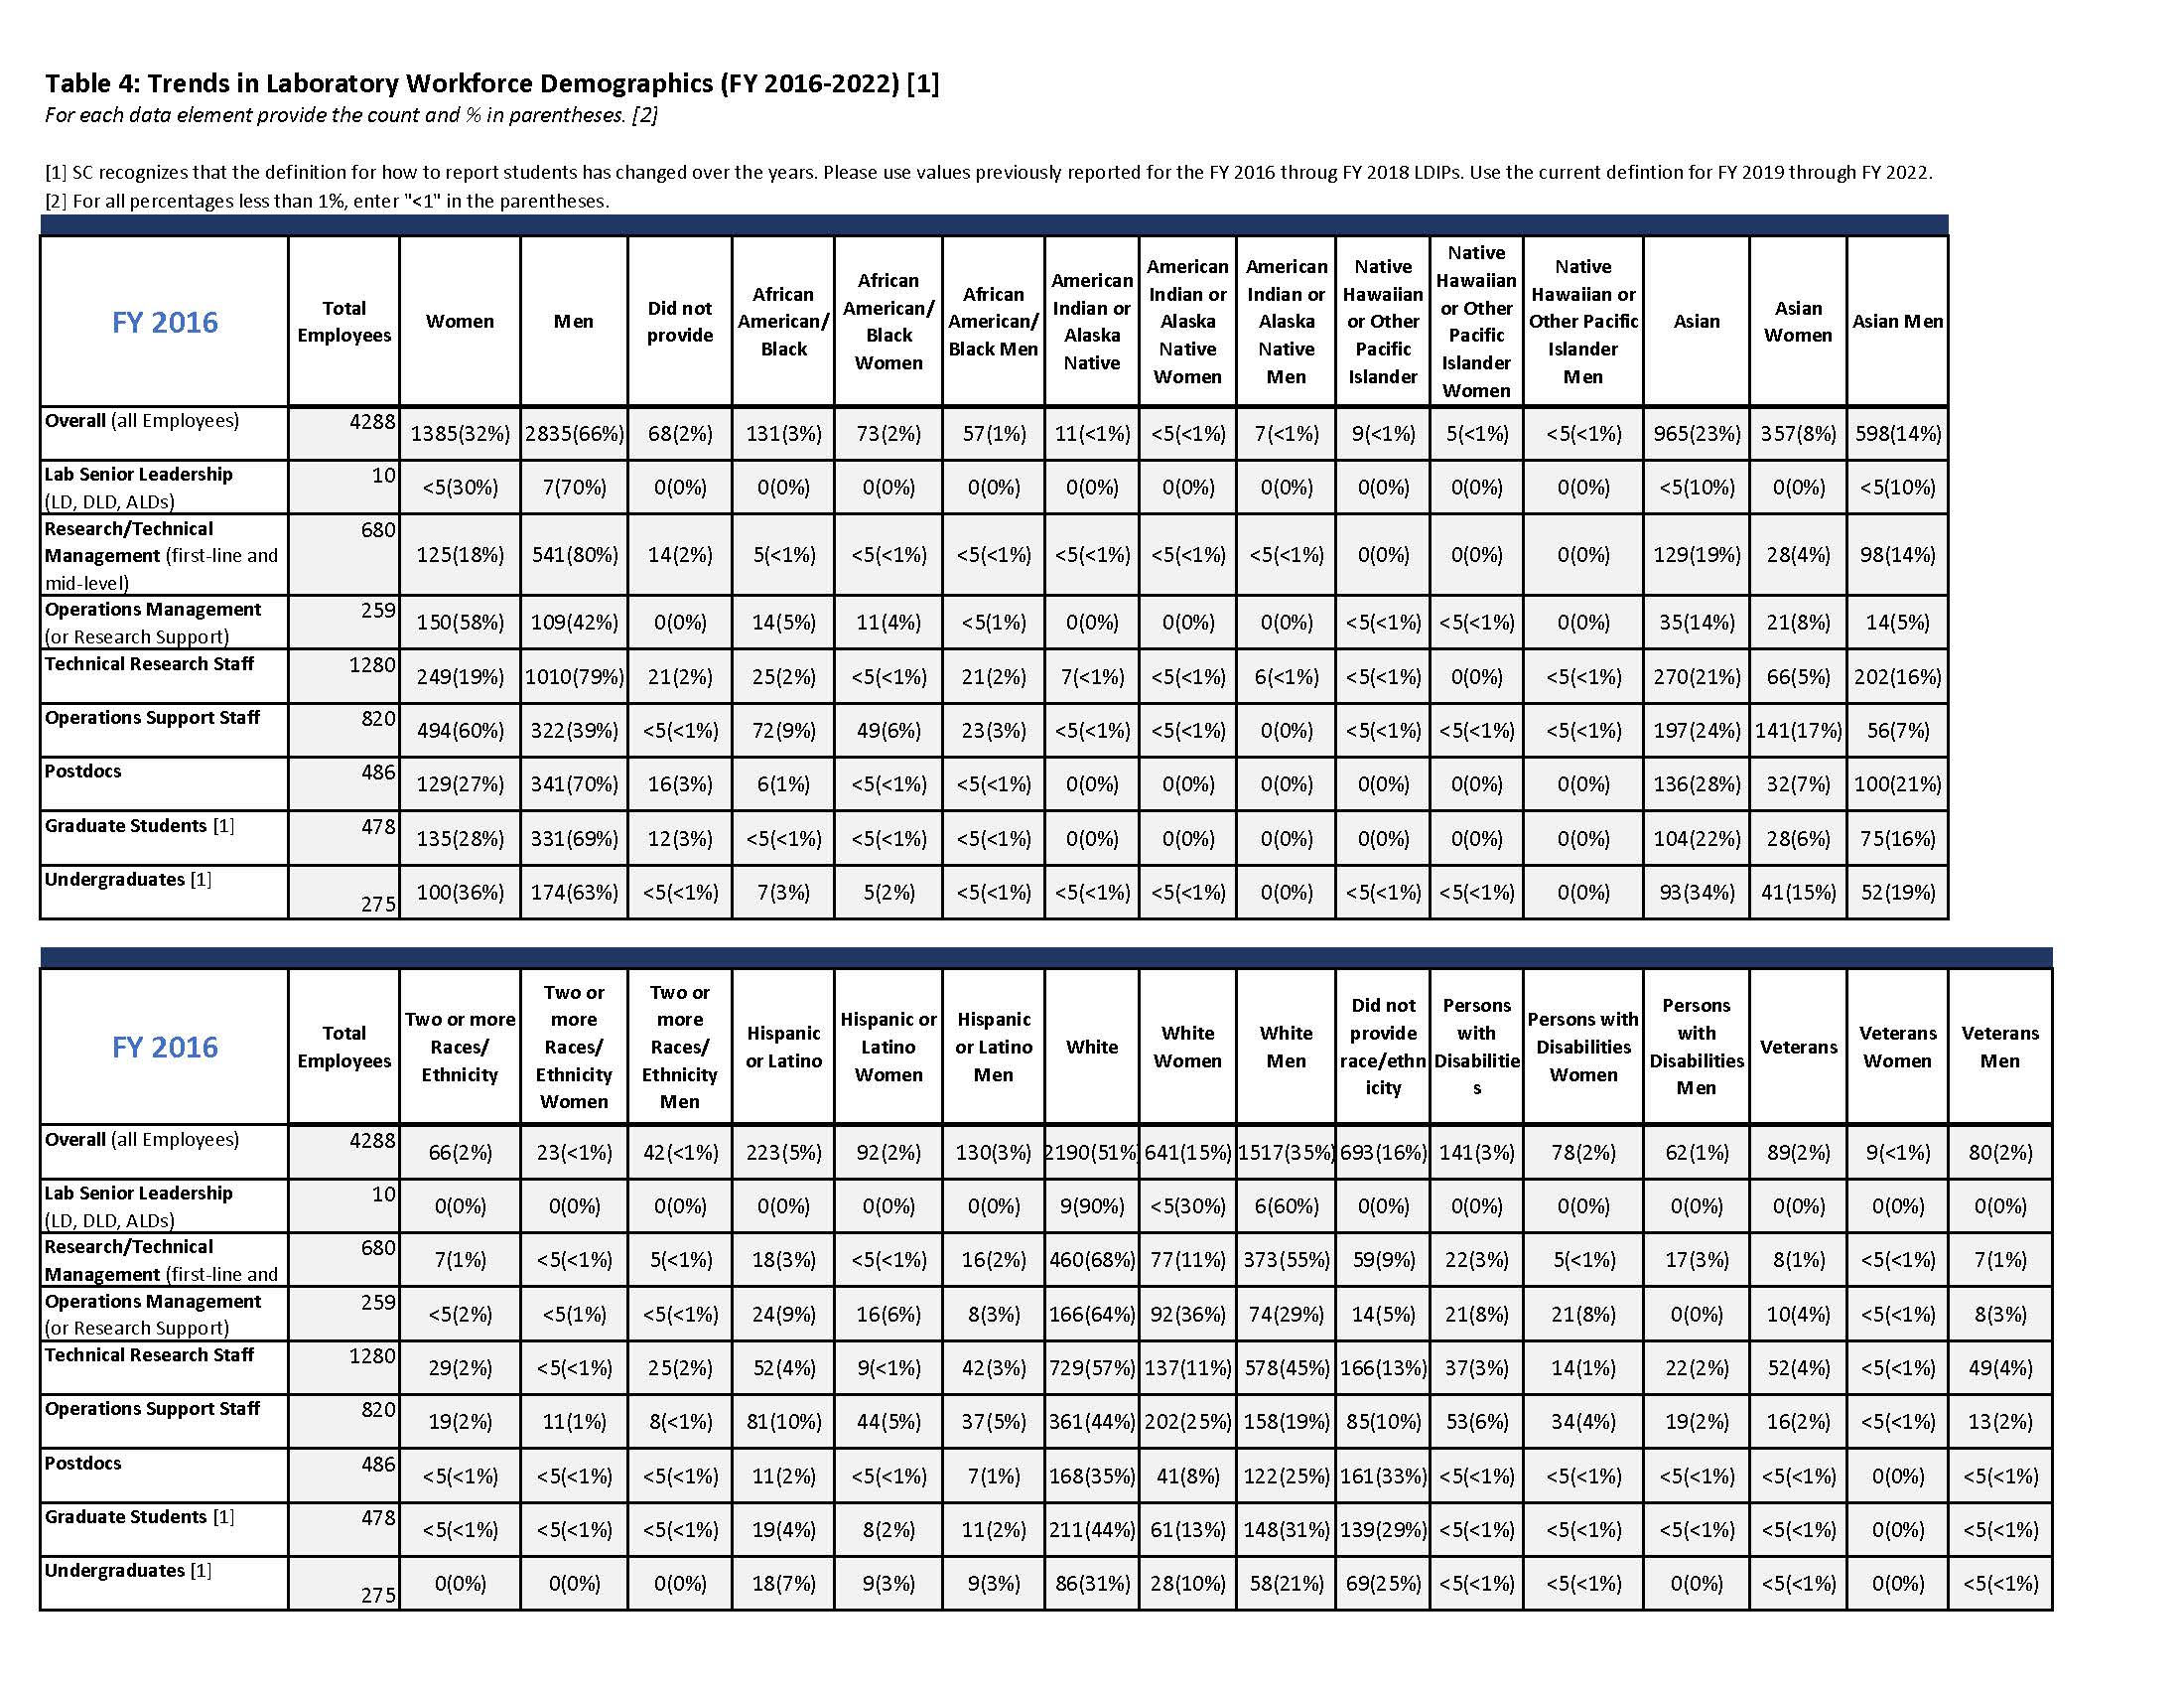 Table with FY16 workforce demographic data